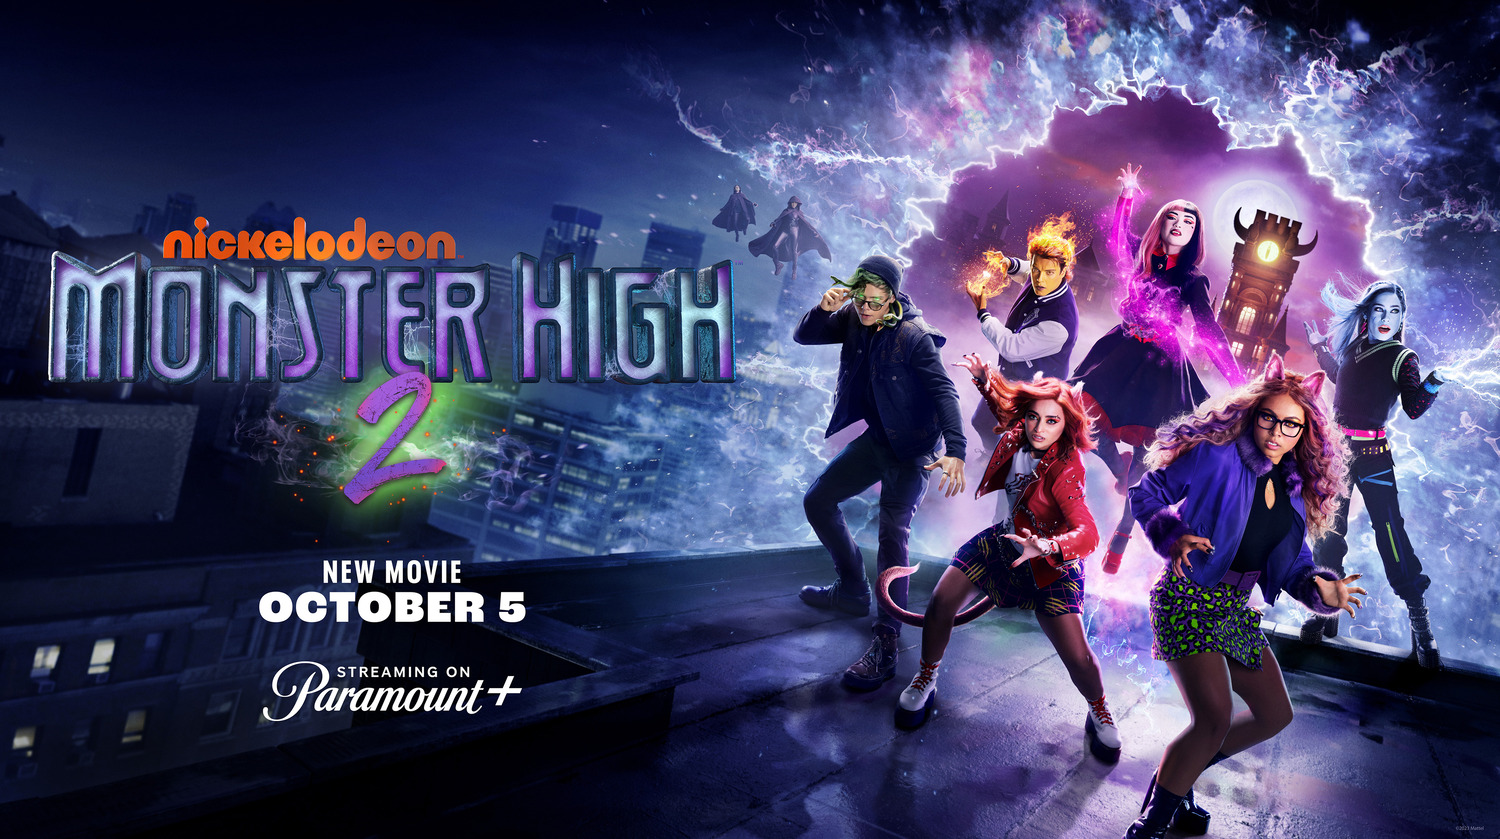 Extra Large Movie Poster Image for Monster High 2 (#2 of 2)